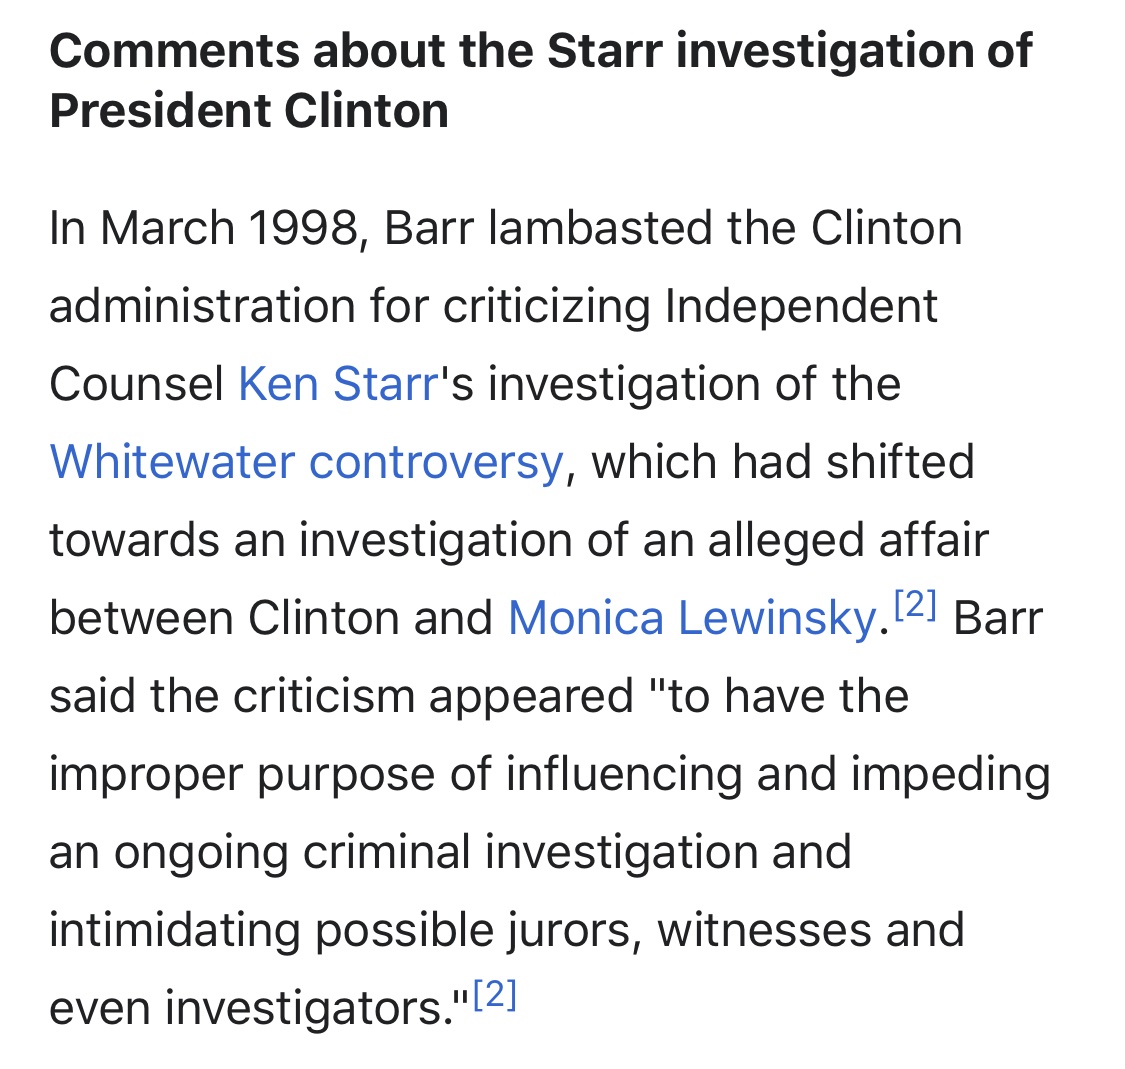 Random information on Bill Barr’s hypocrisy. Barr is a champion on the power of the presidency. He was a fixer during the Iran-Contra scandal. Barr made it go away. He killed the Mueller Report and enabled the current Russian collusion. Here’s what he thought about Clinton